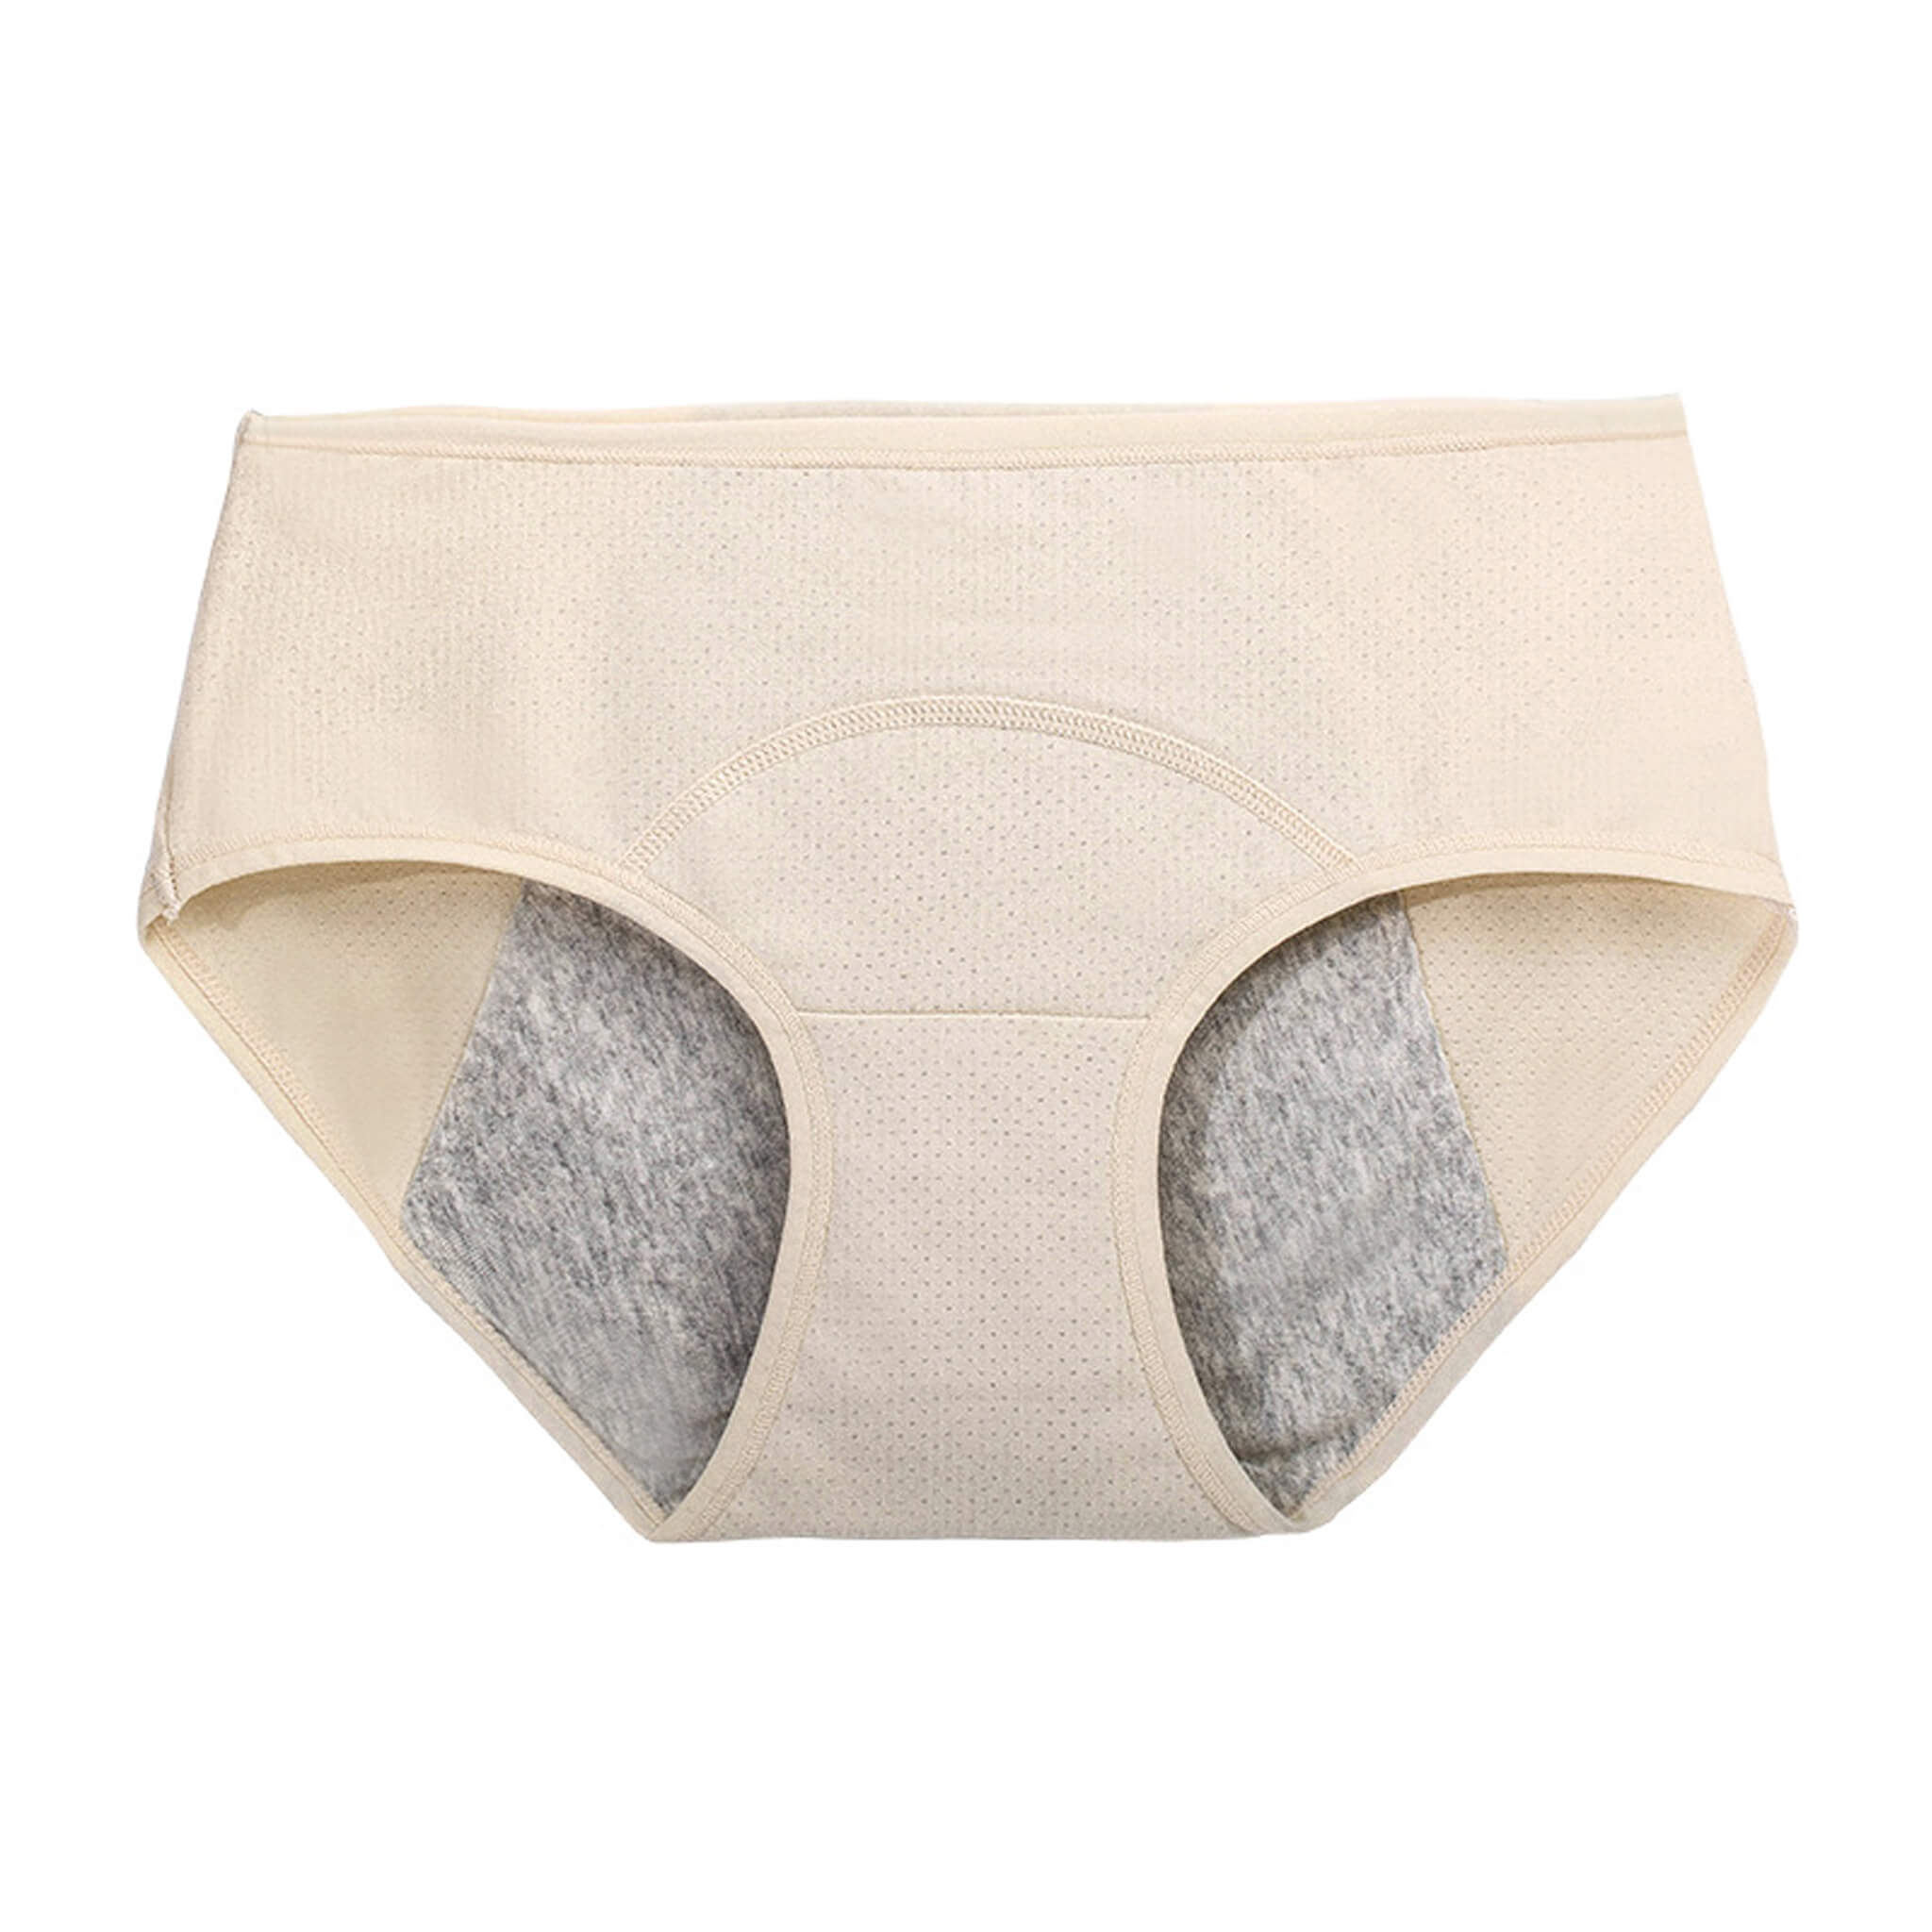 3 Pack Period Panties Leak Proof . menstrual Underwear 3 Layer Protection  Colors Navy , Nude and Grey 